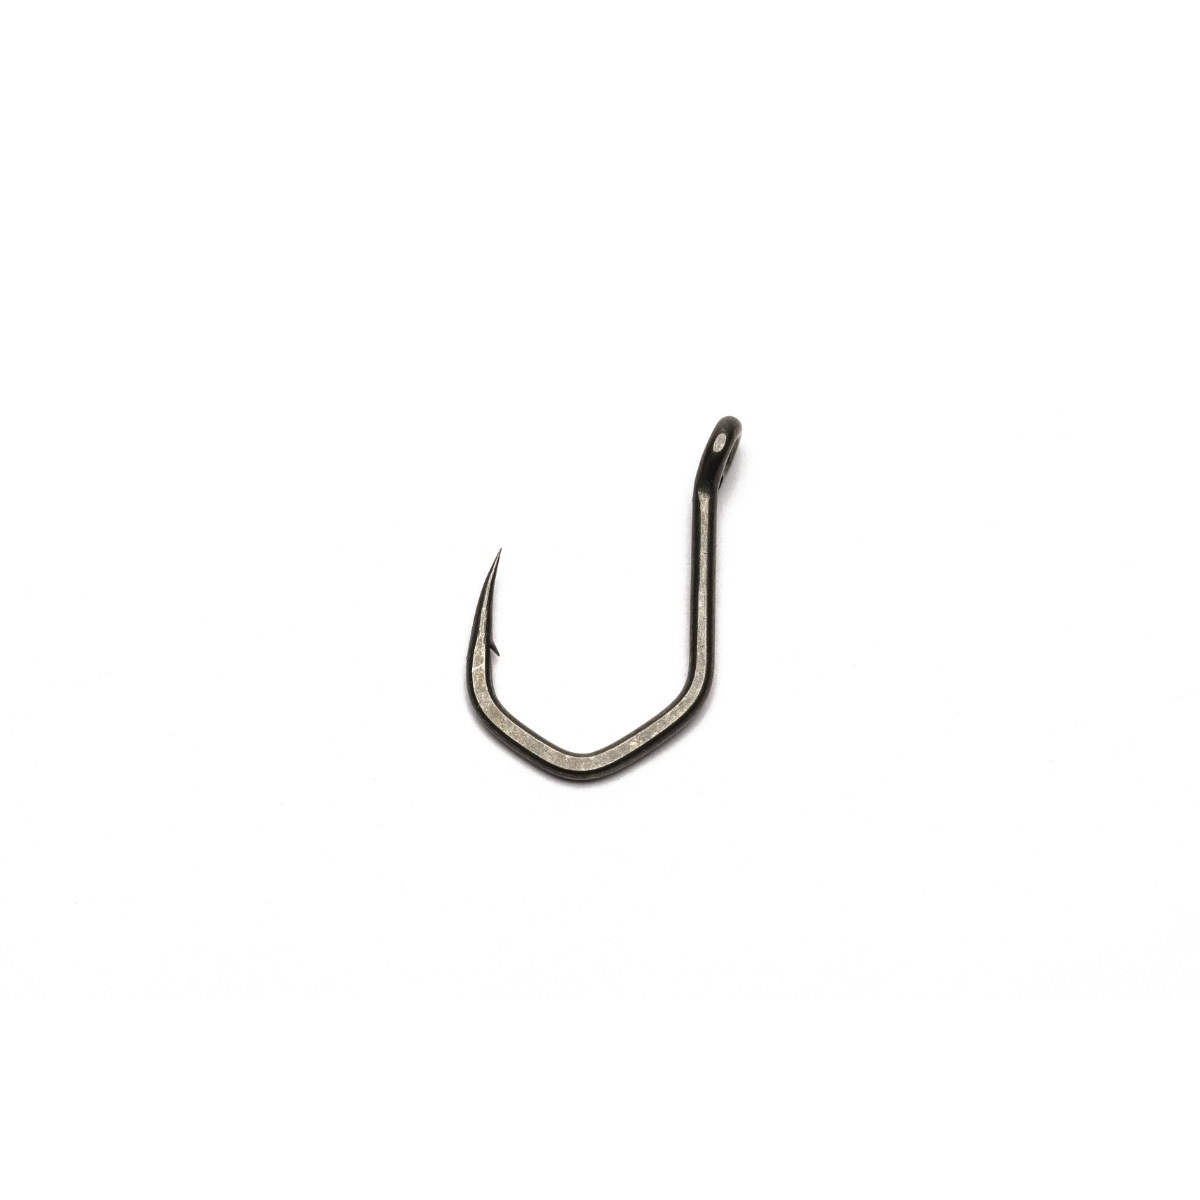 Nash Chod Claw - Size 5 Micro Barbed